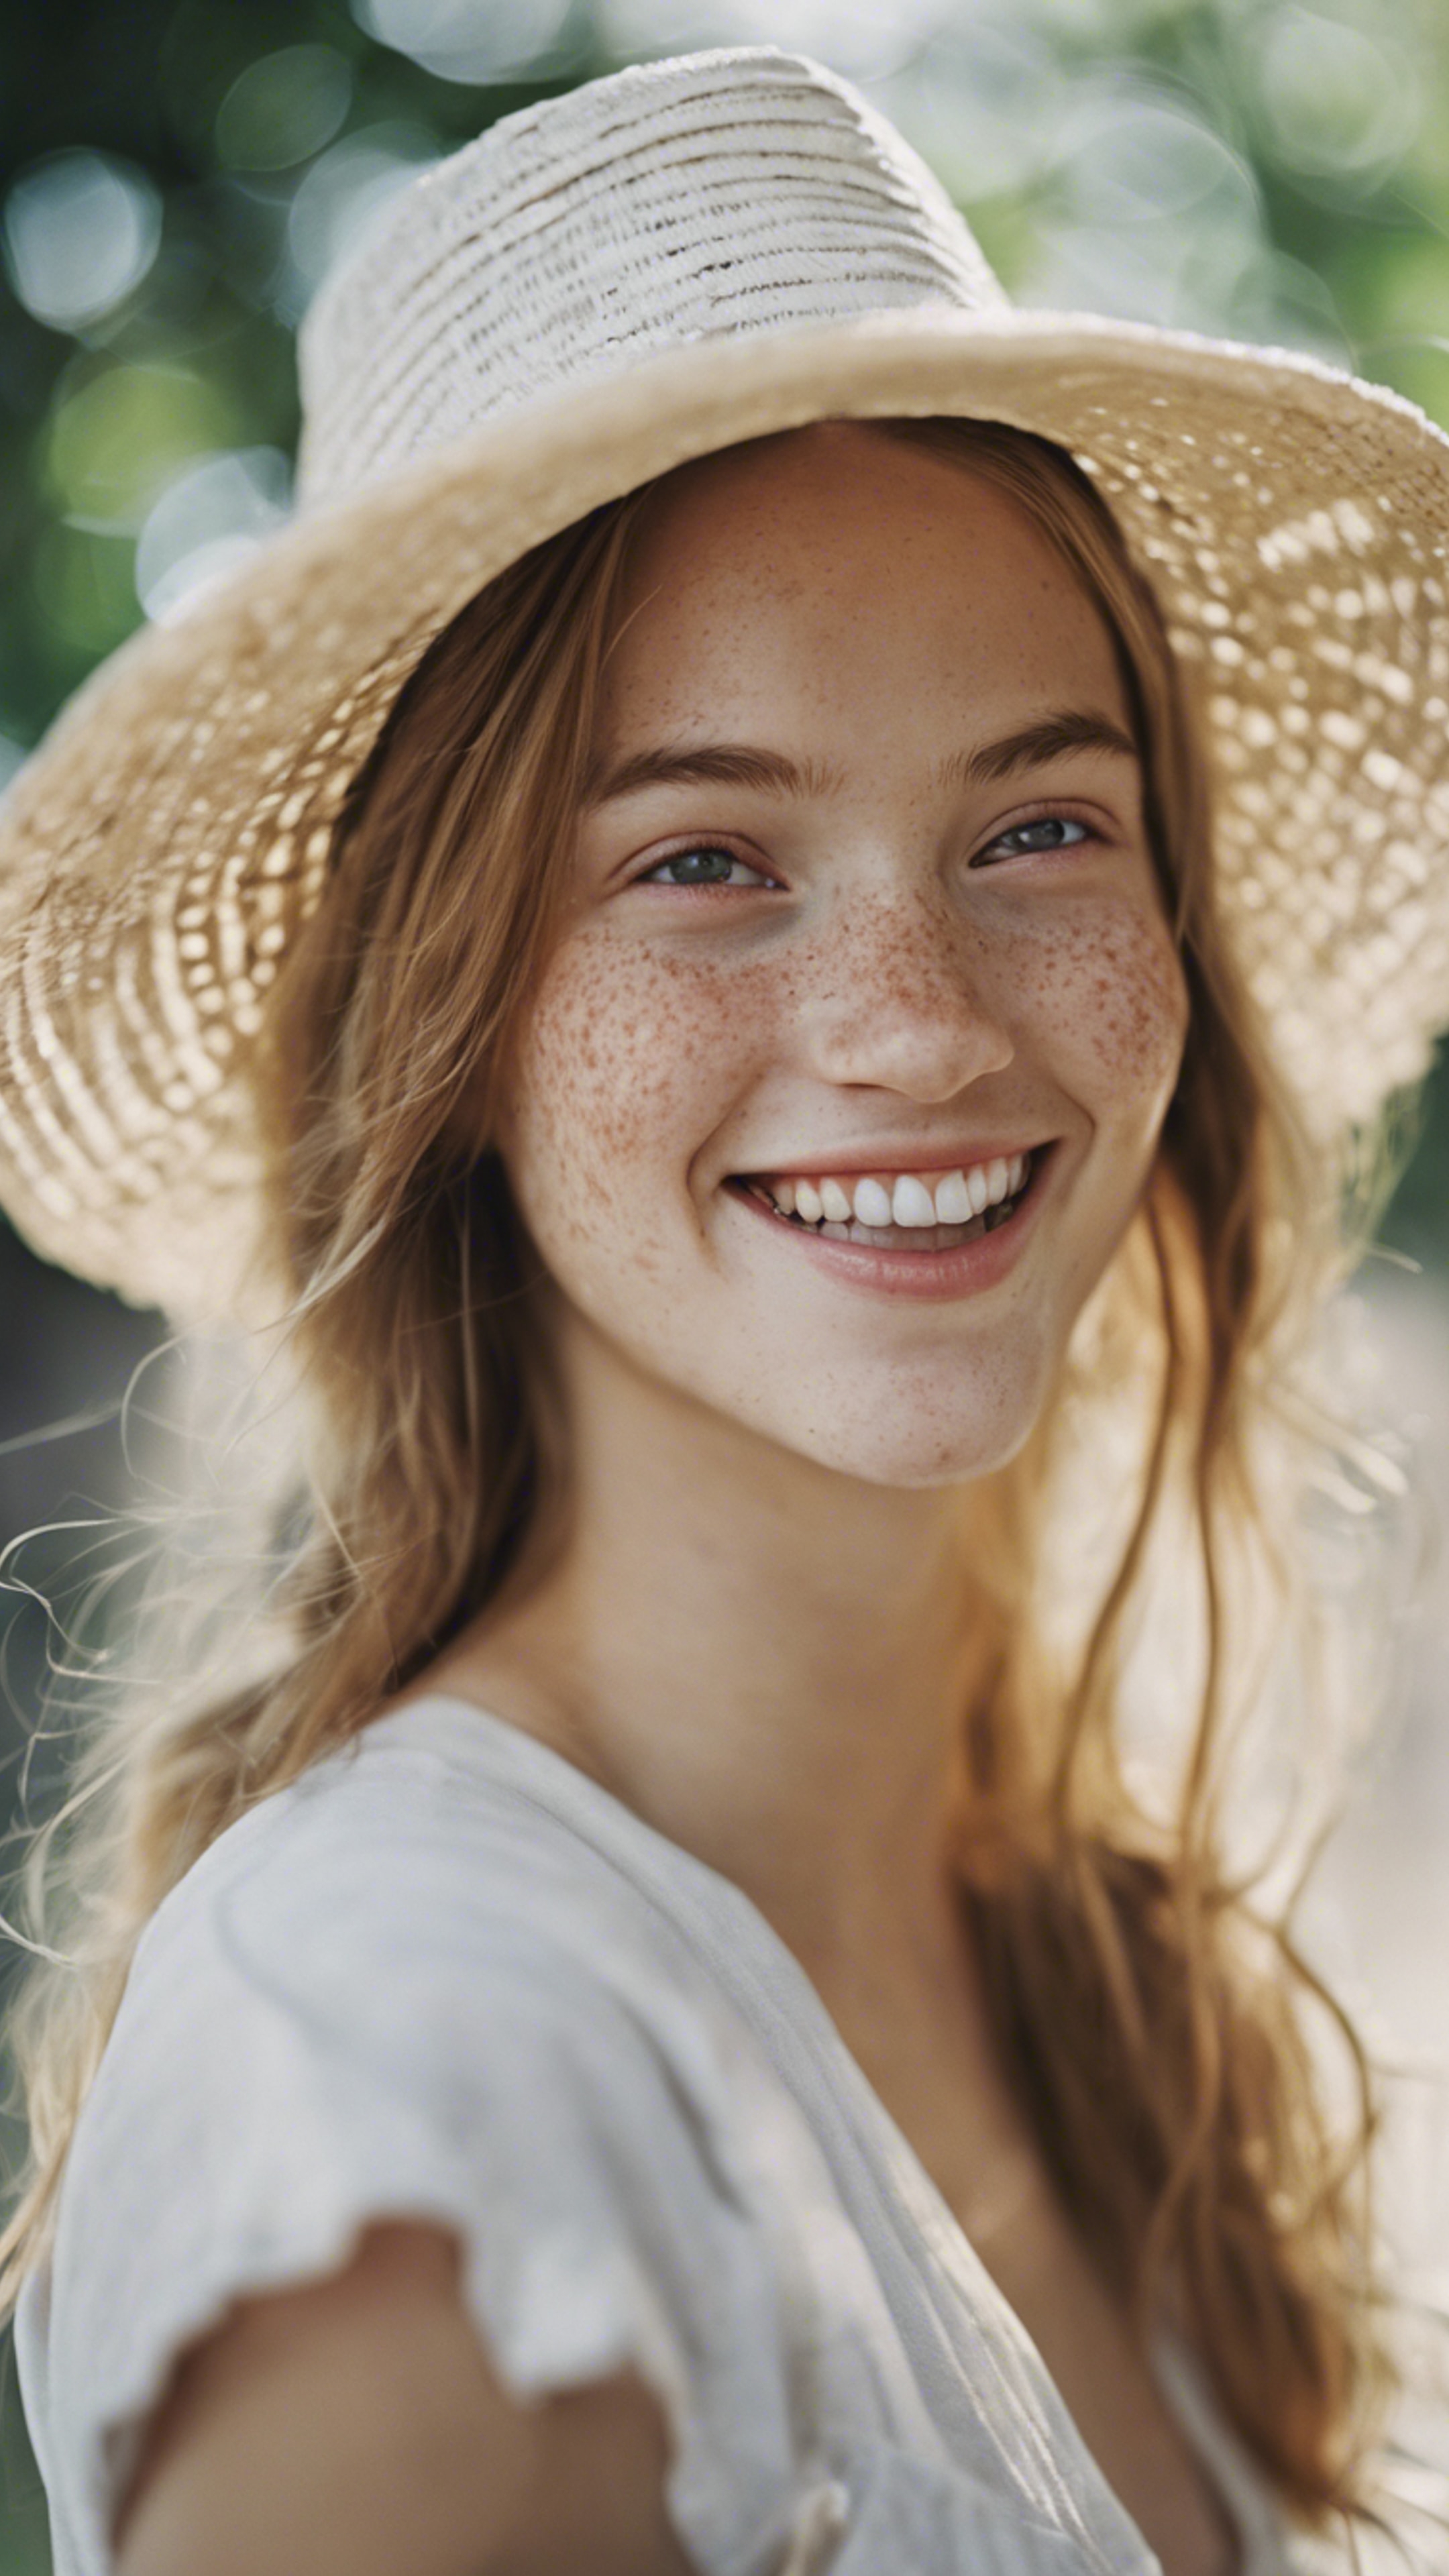 A portrait of a cute girl with freckles and a big smile, wearing a white straw hat. Tapeta[344e43c9fe594ea98e55]